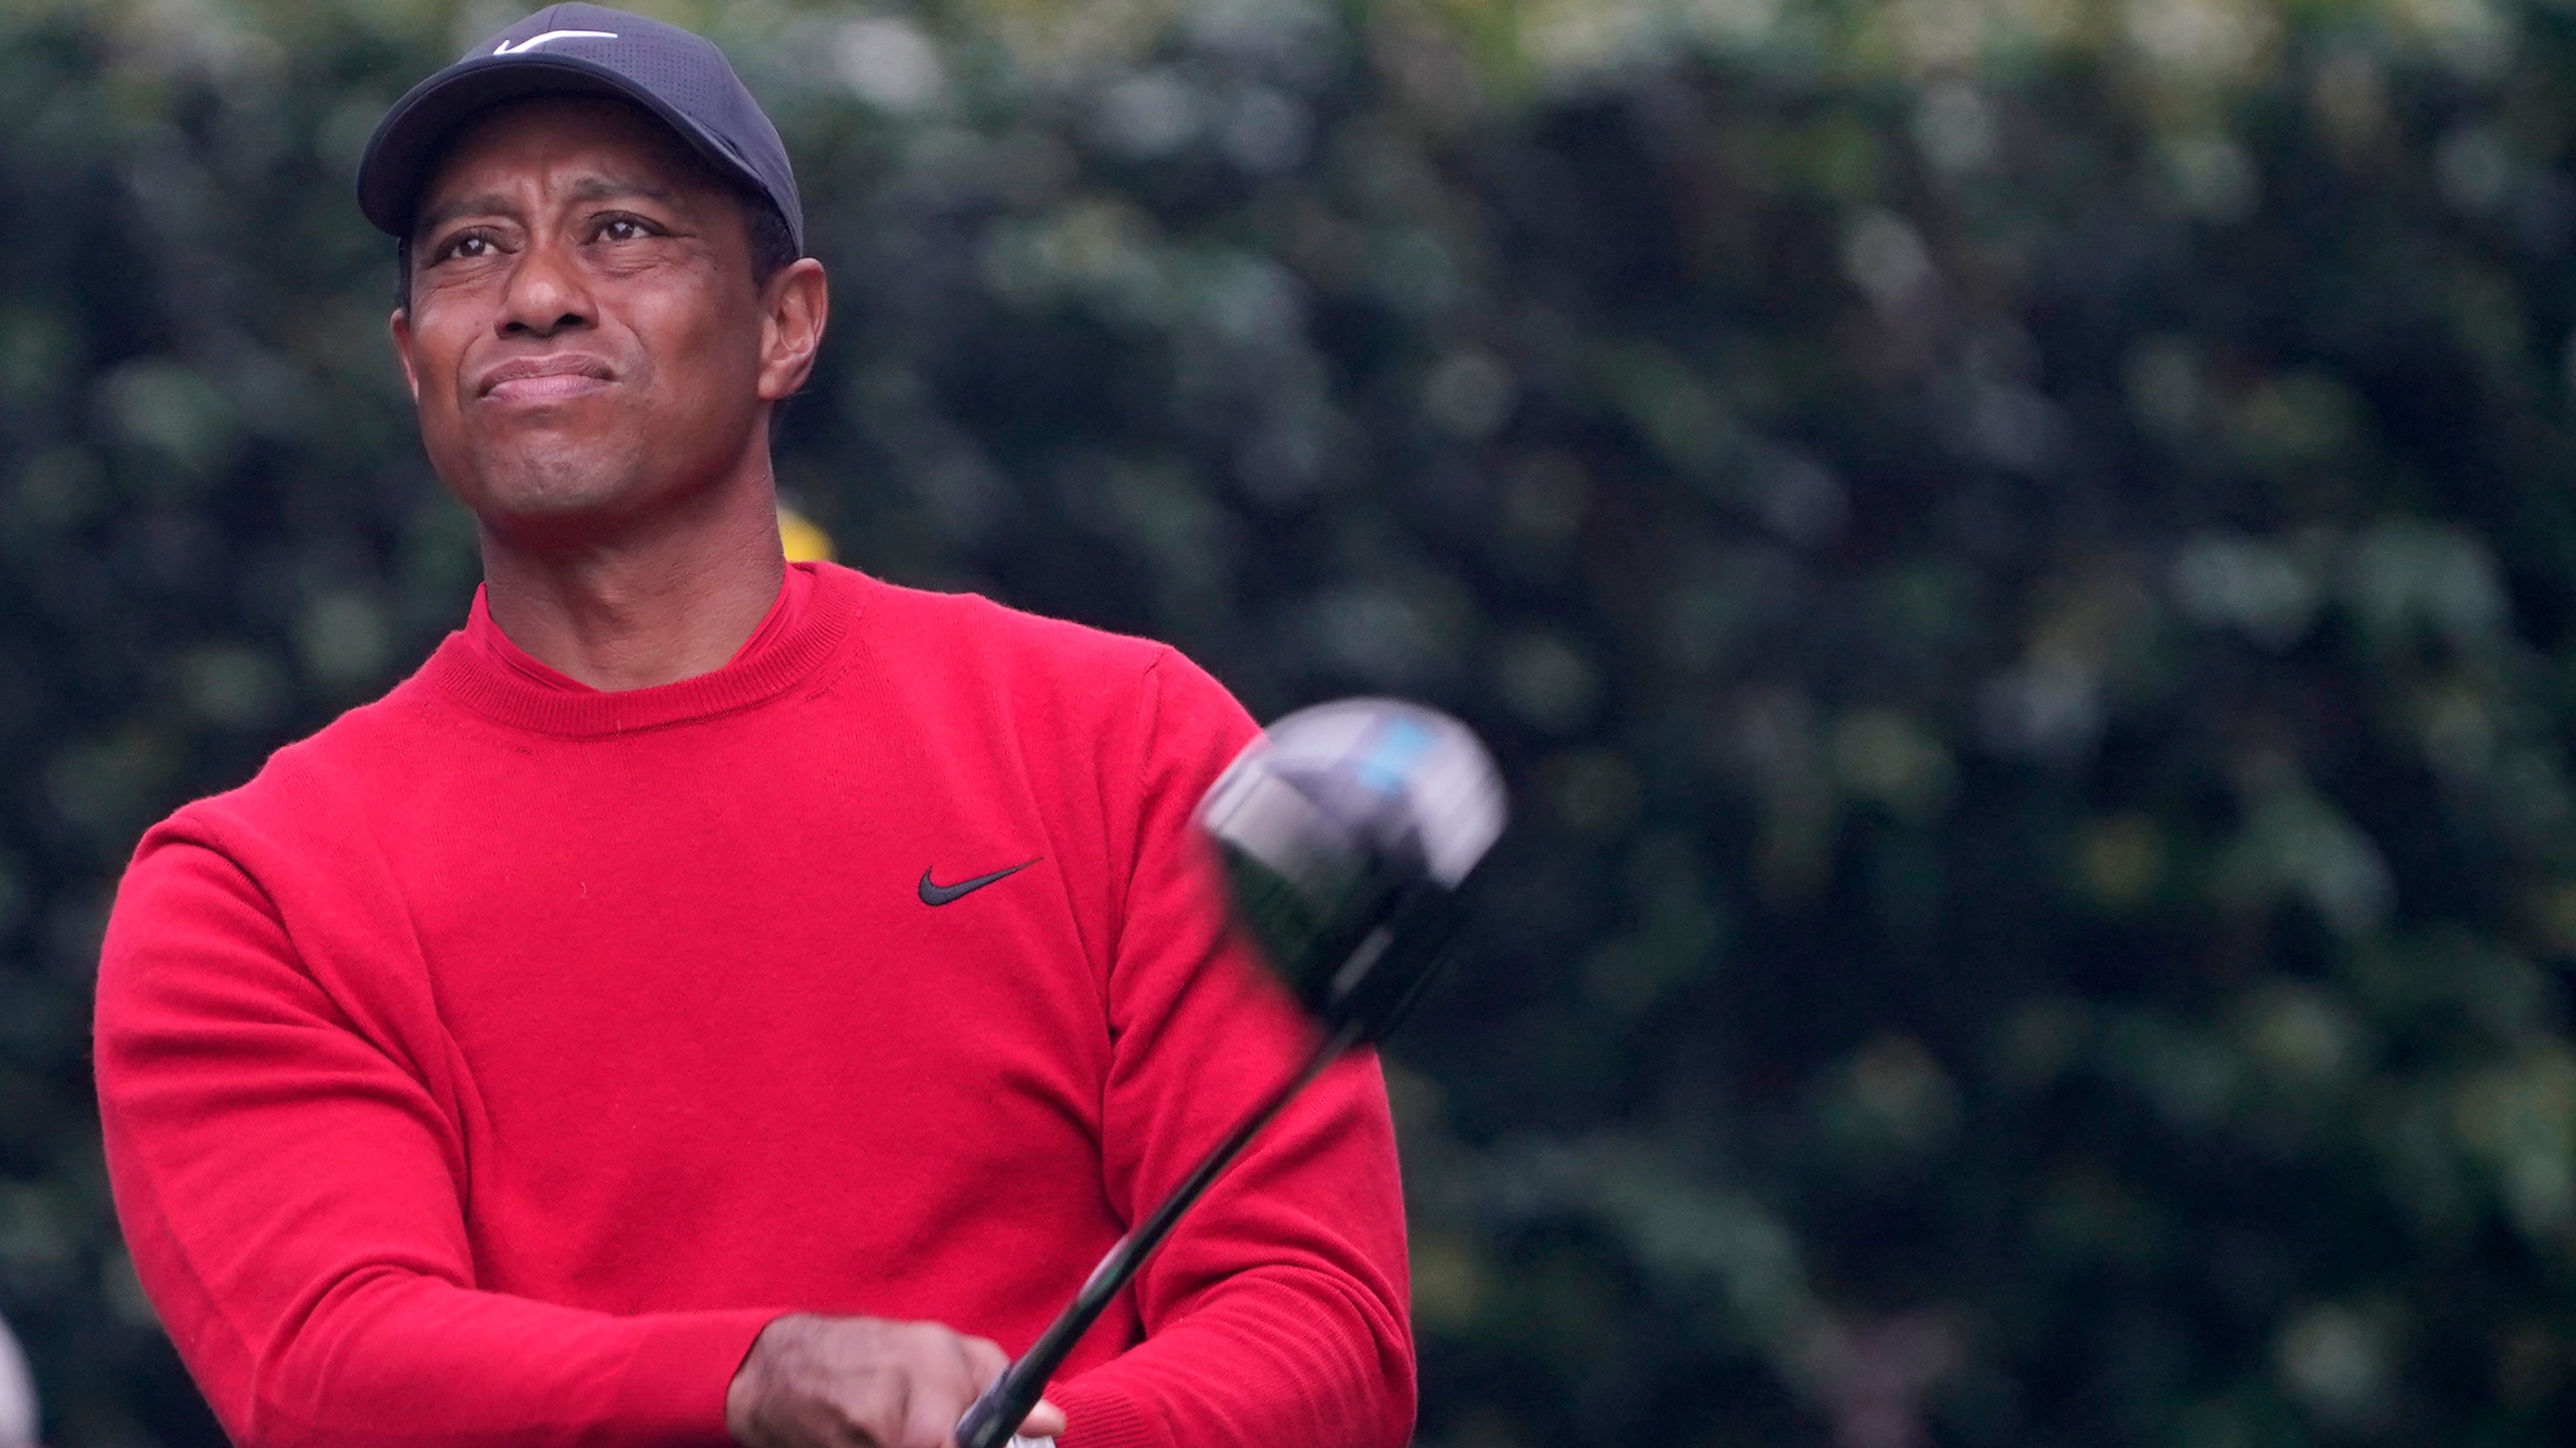 Tiger Woods car accident: Woods is transferred to Cedars-Sinai Medical Center